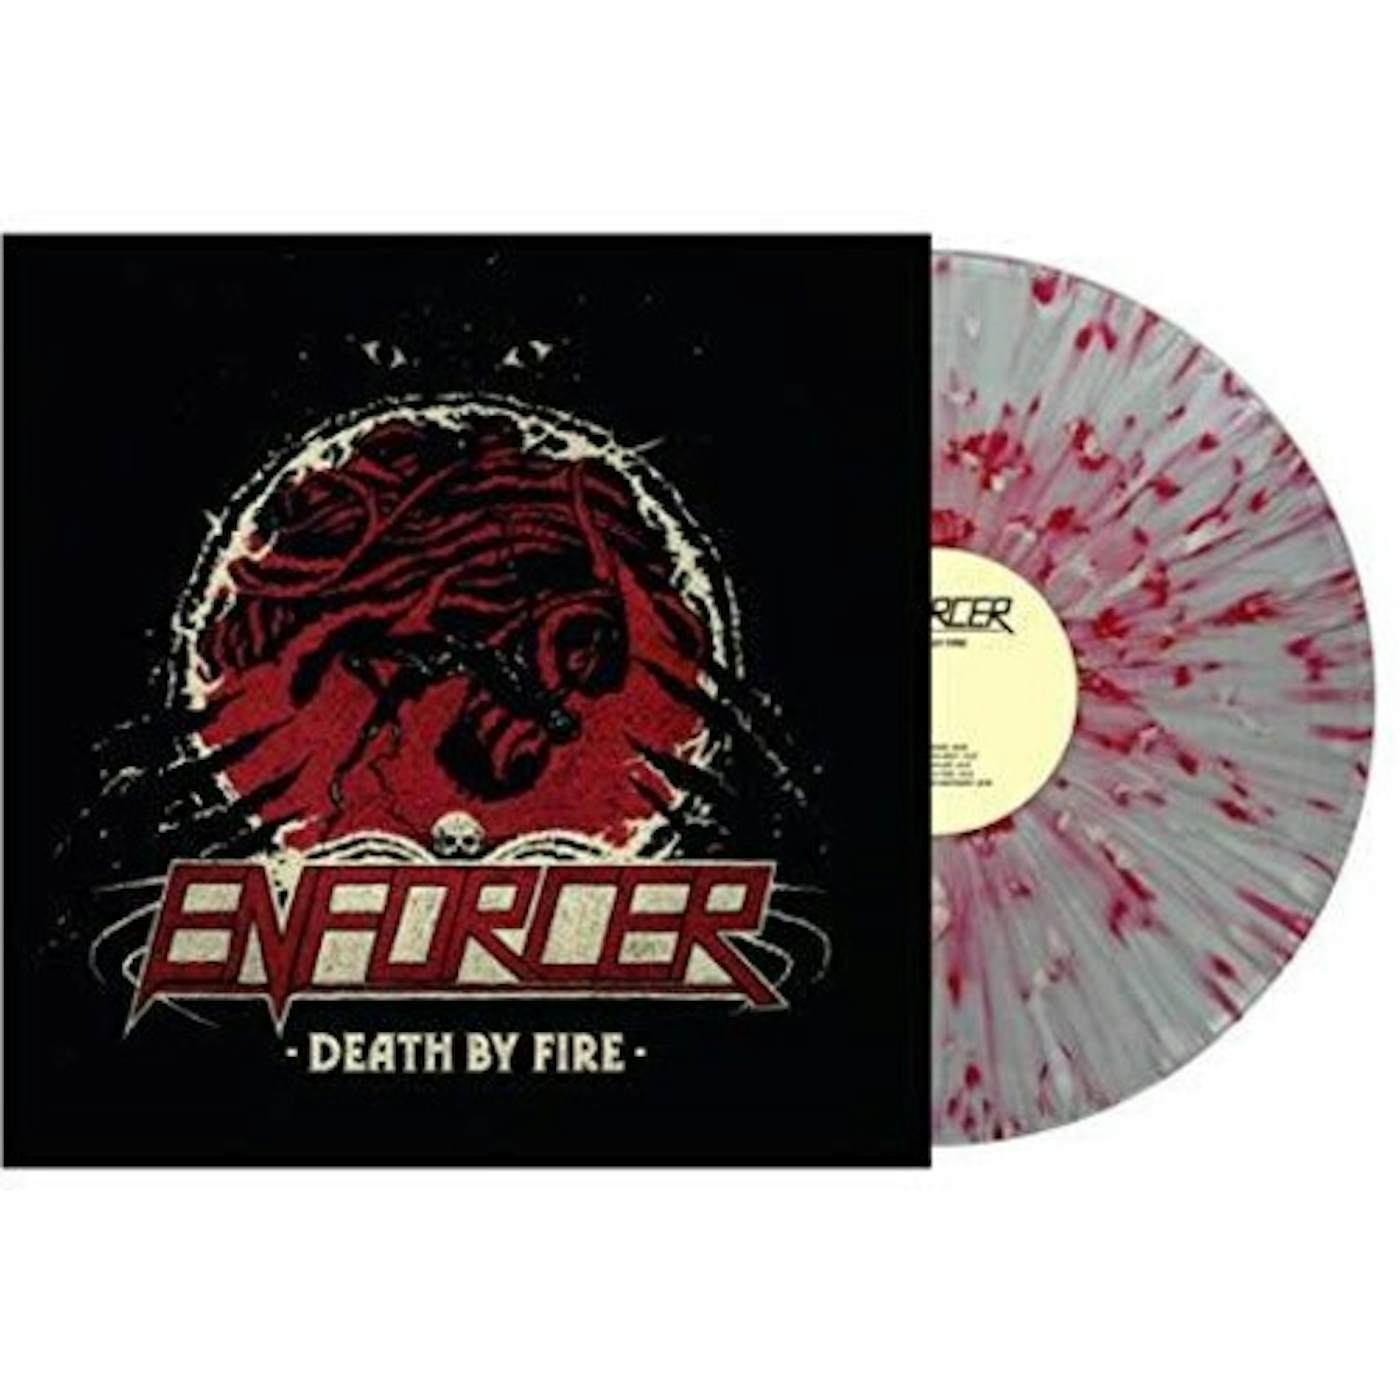 Enforcer Death By Fire Vinyl Record